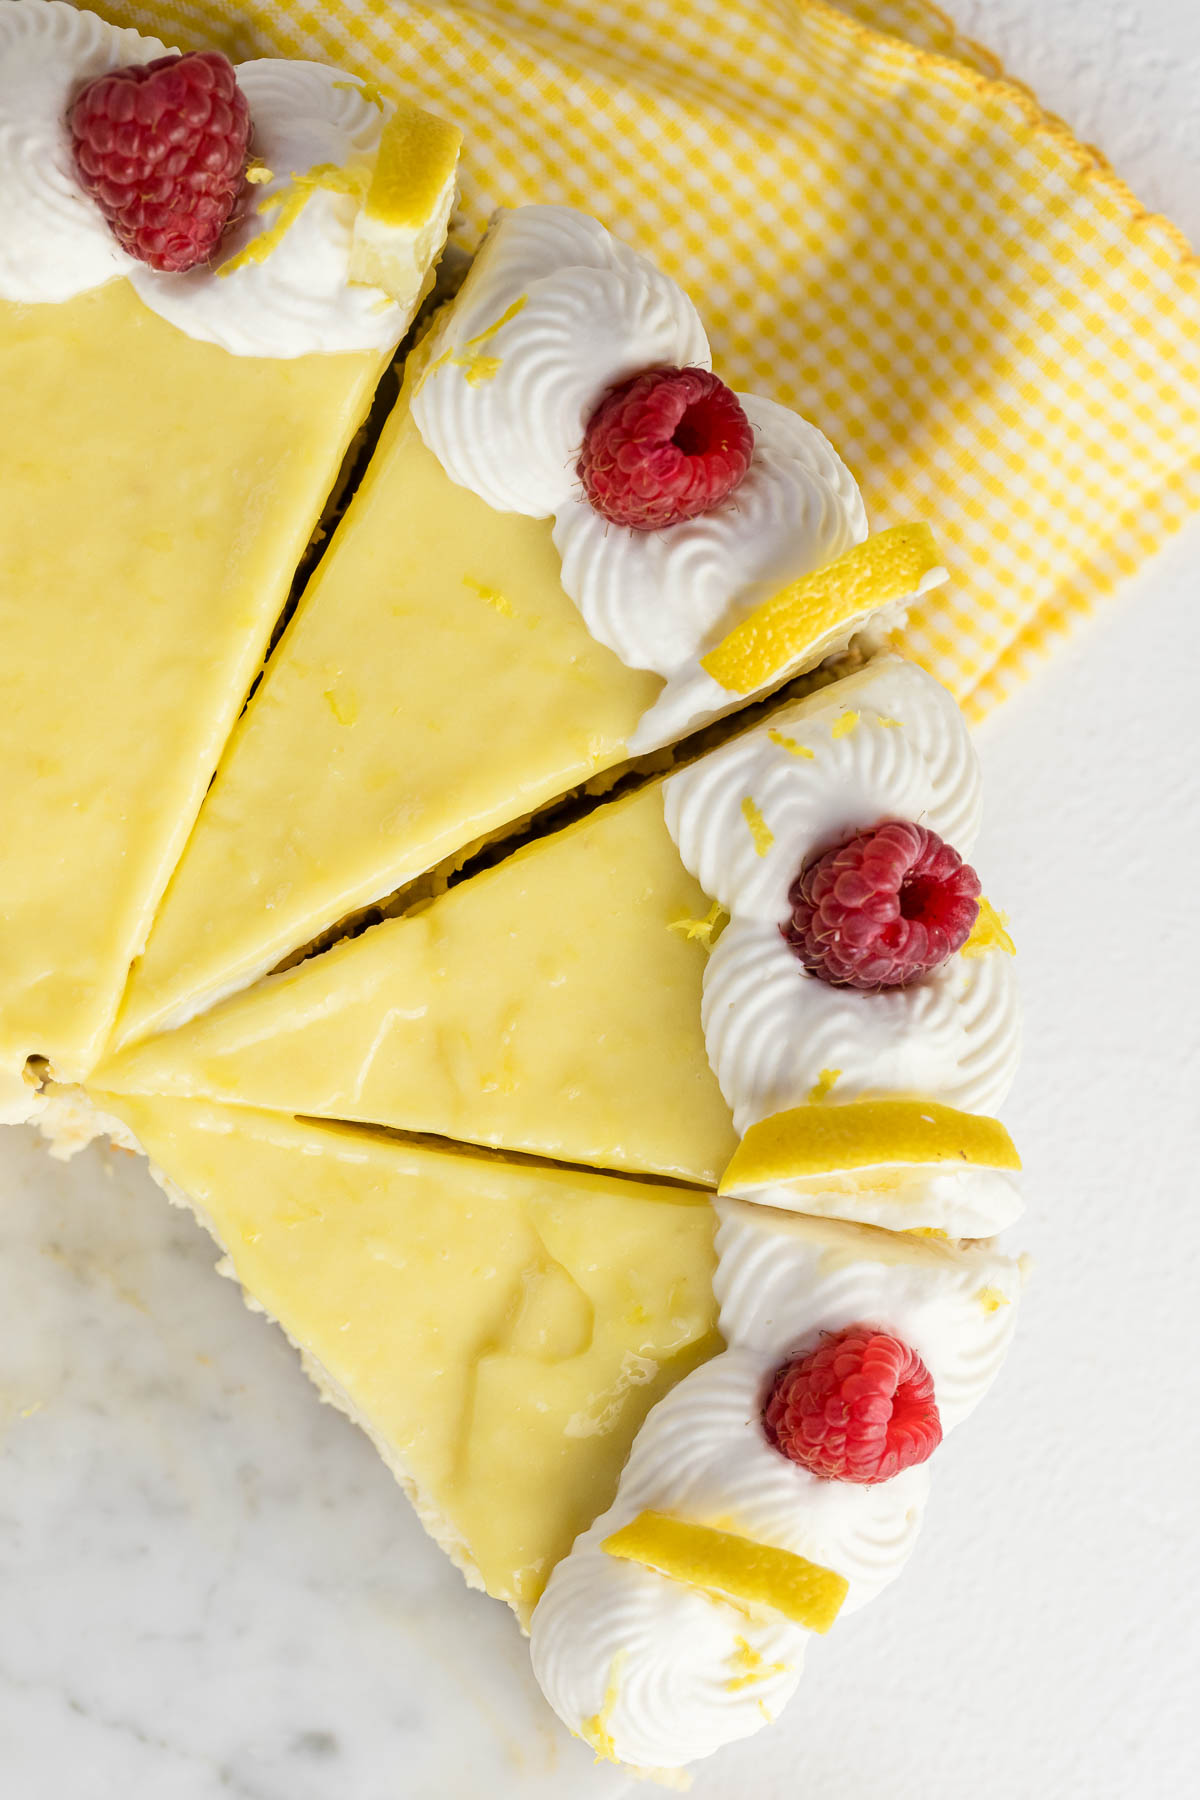 lemon cheesecake cut into slices topped with lemon curd, whipped cream and raspberries